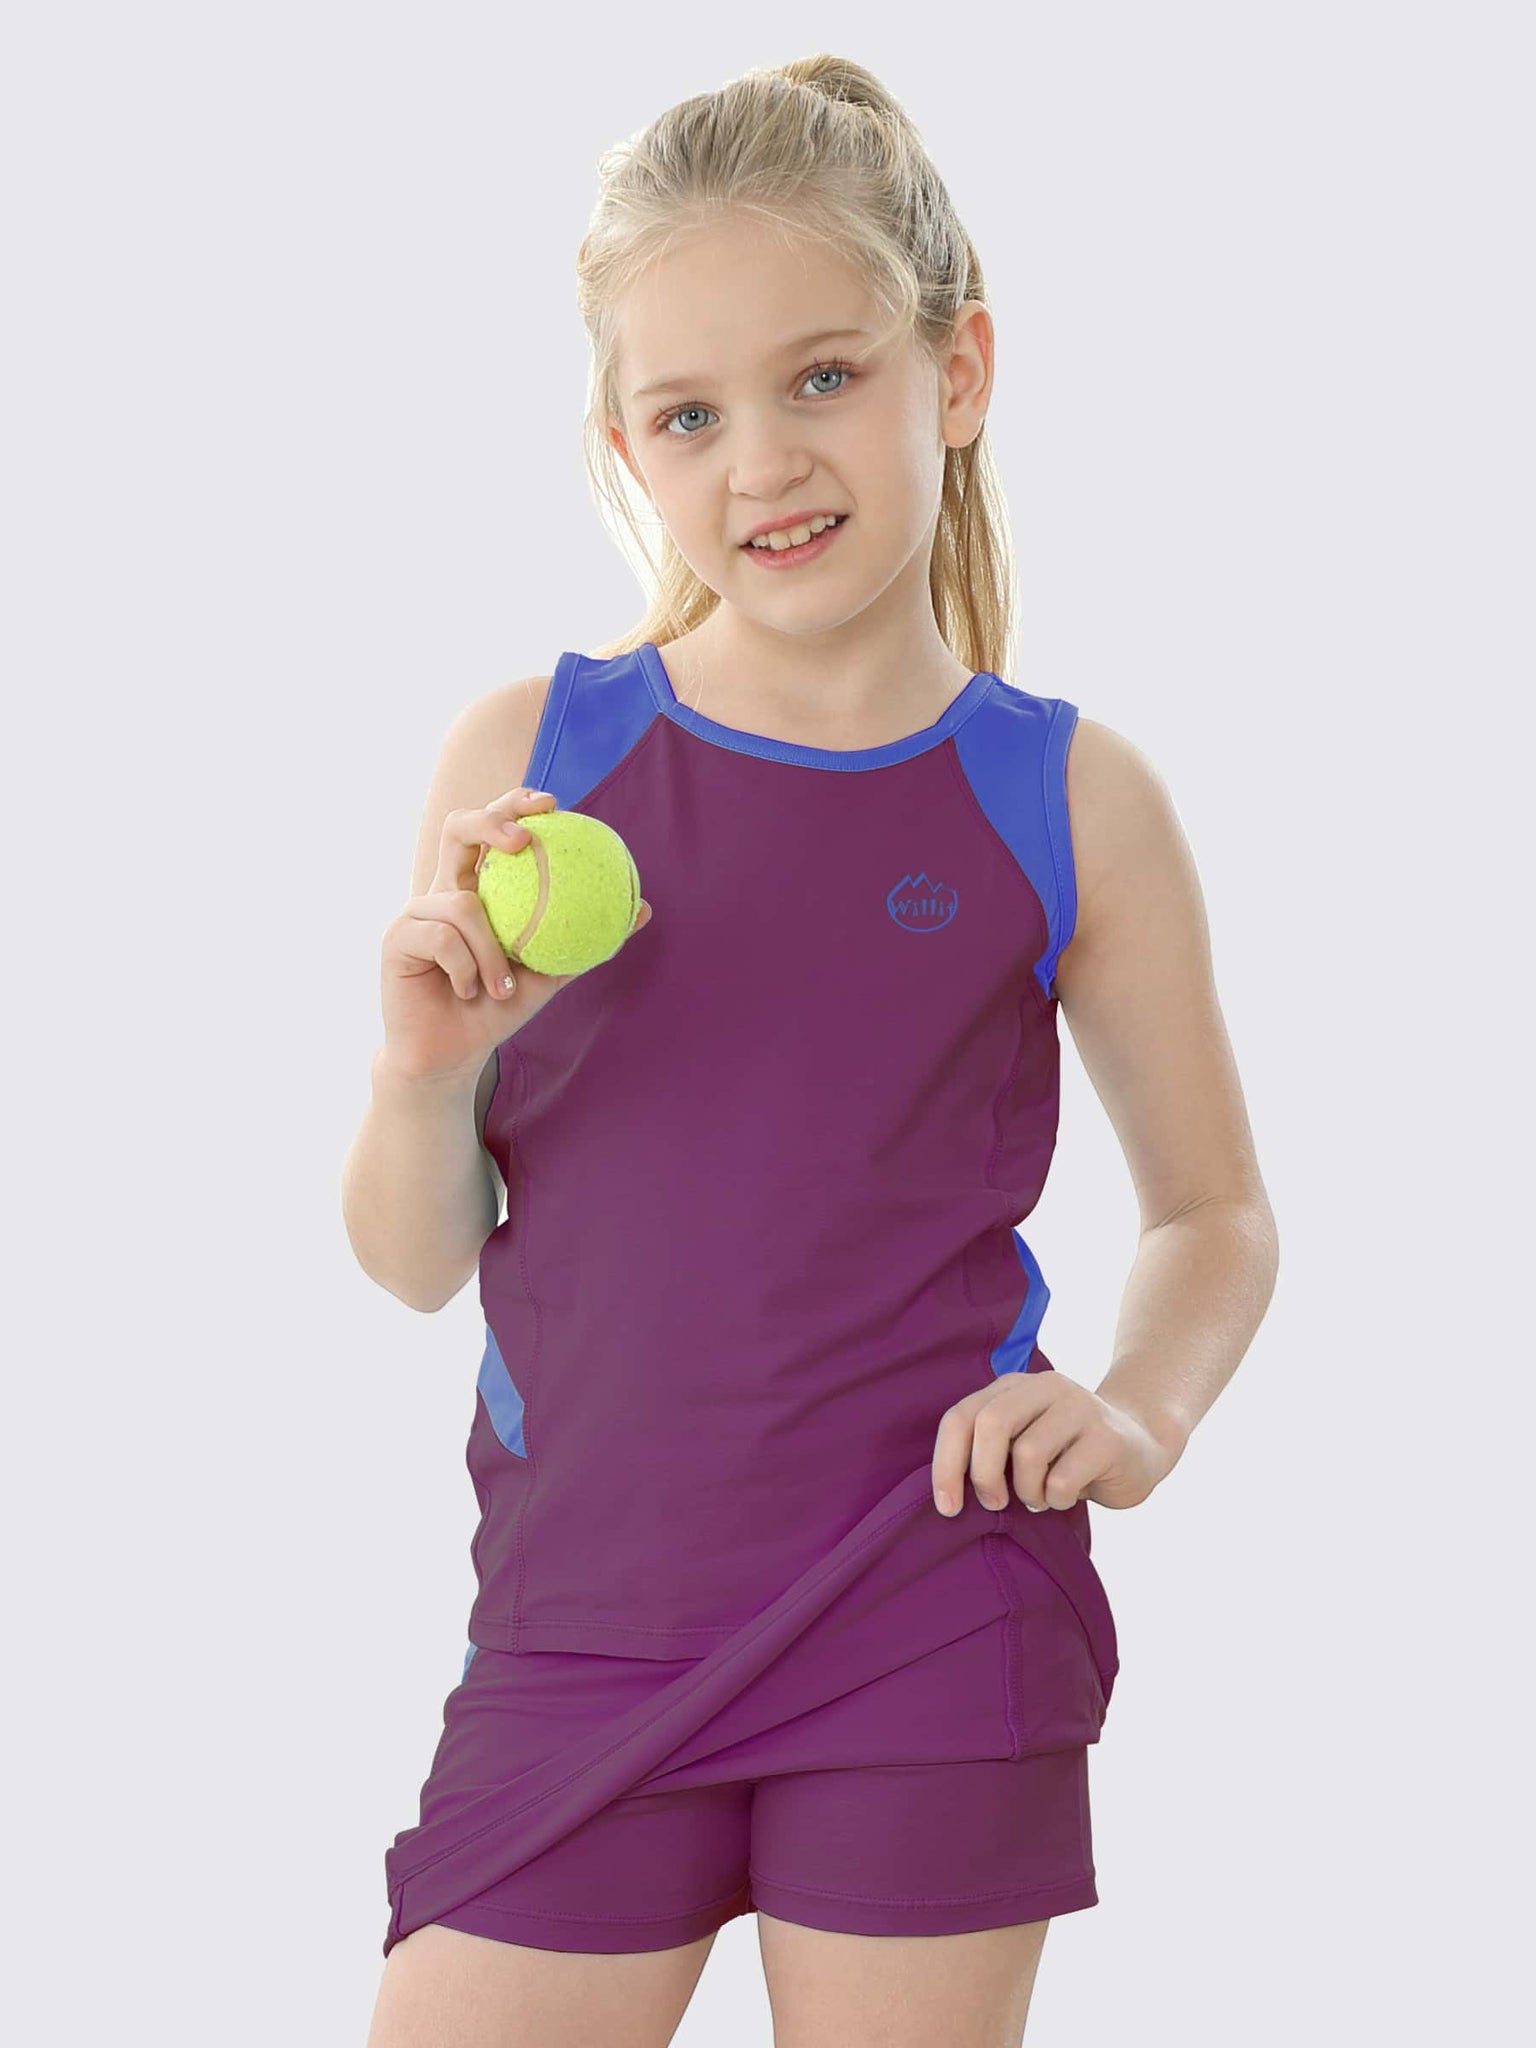 Willit Girls' Tennis Outfit_Purple_model3